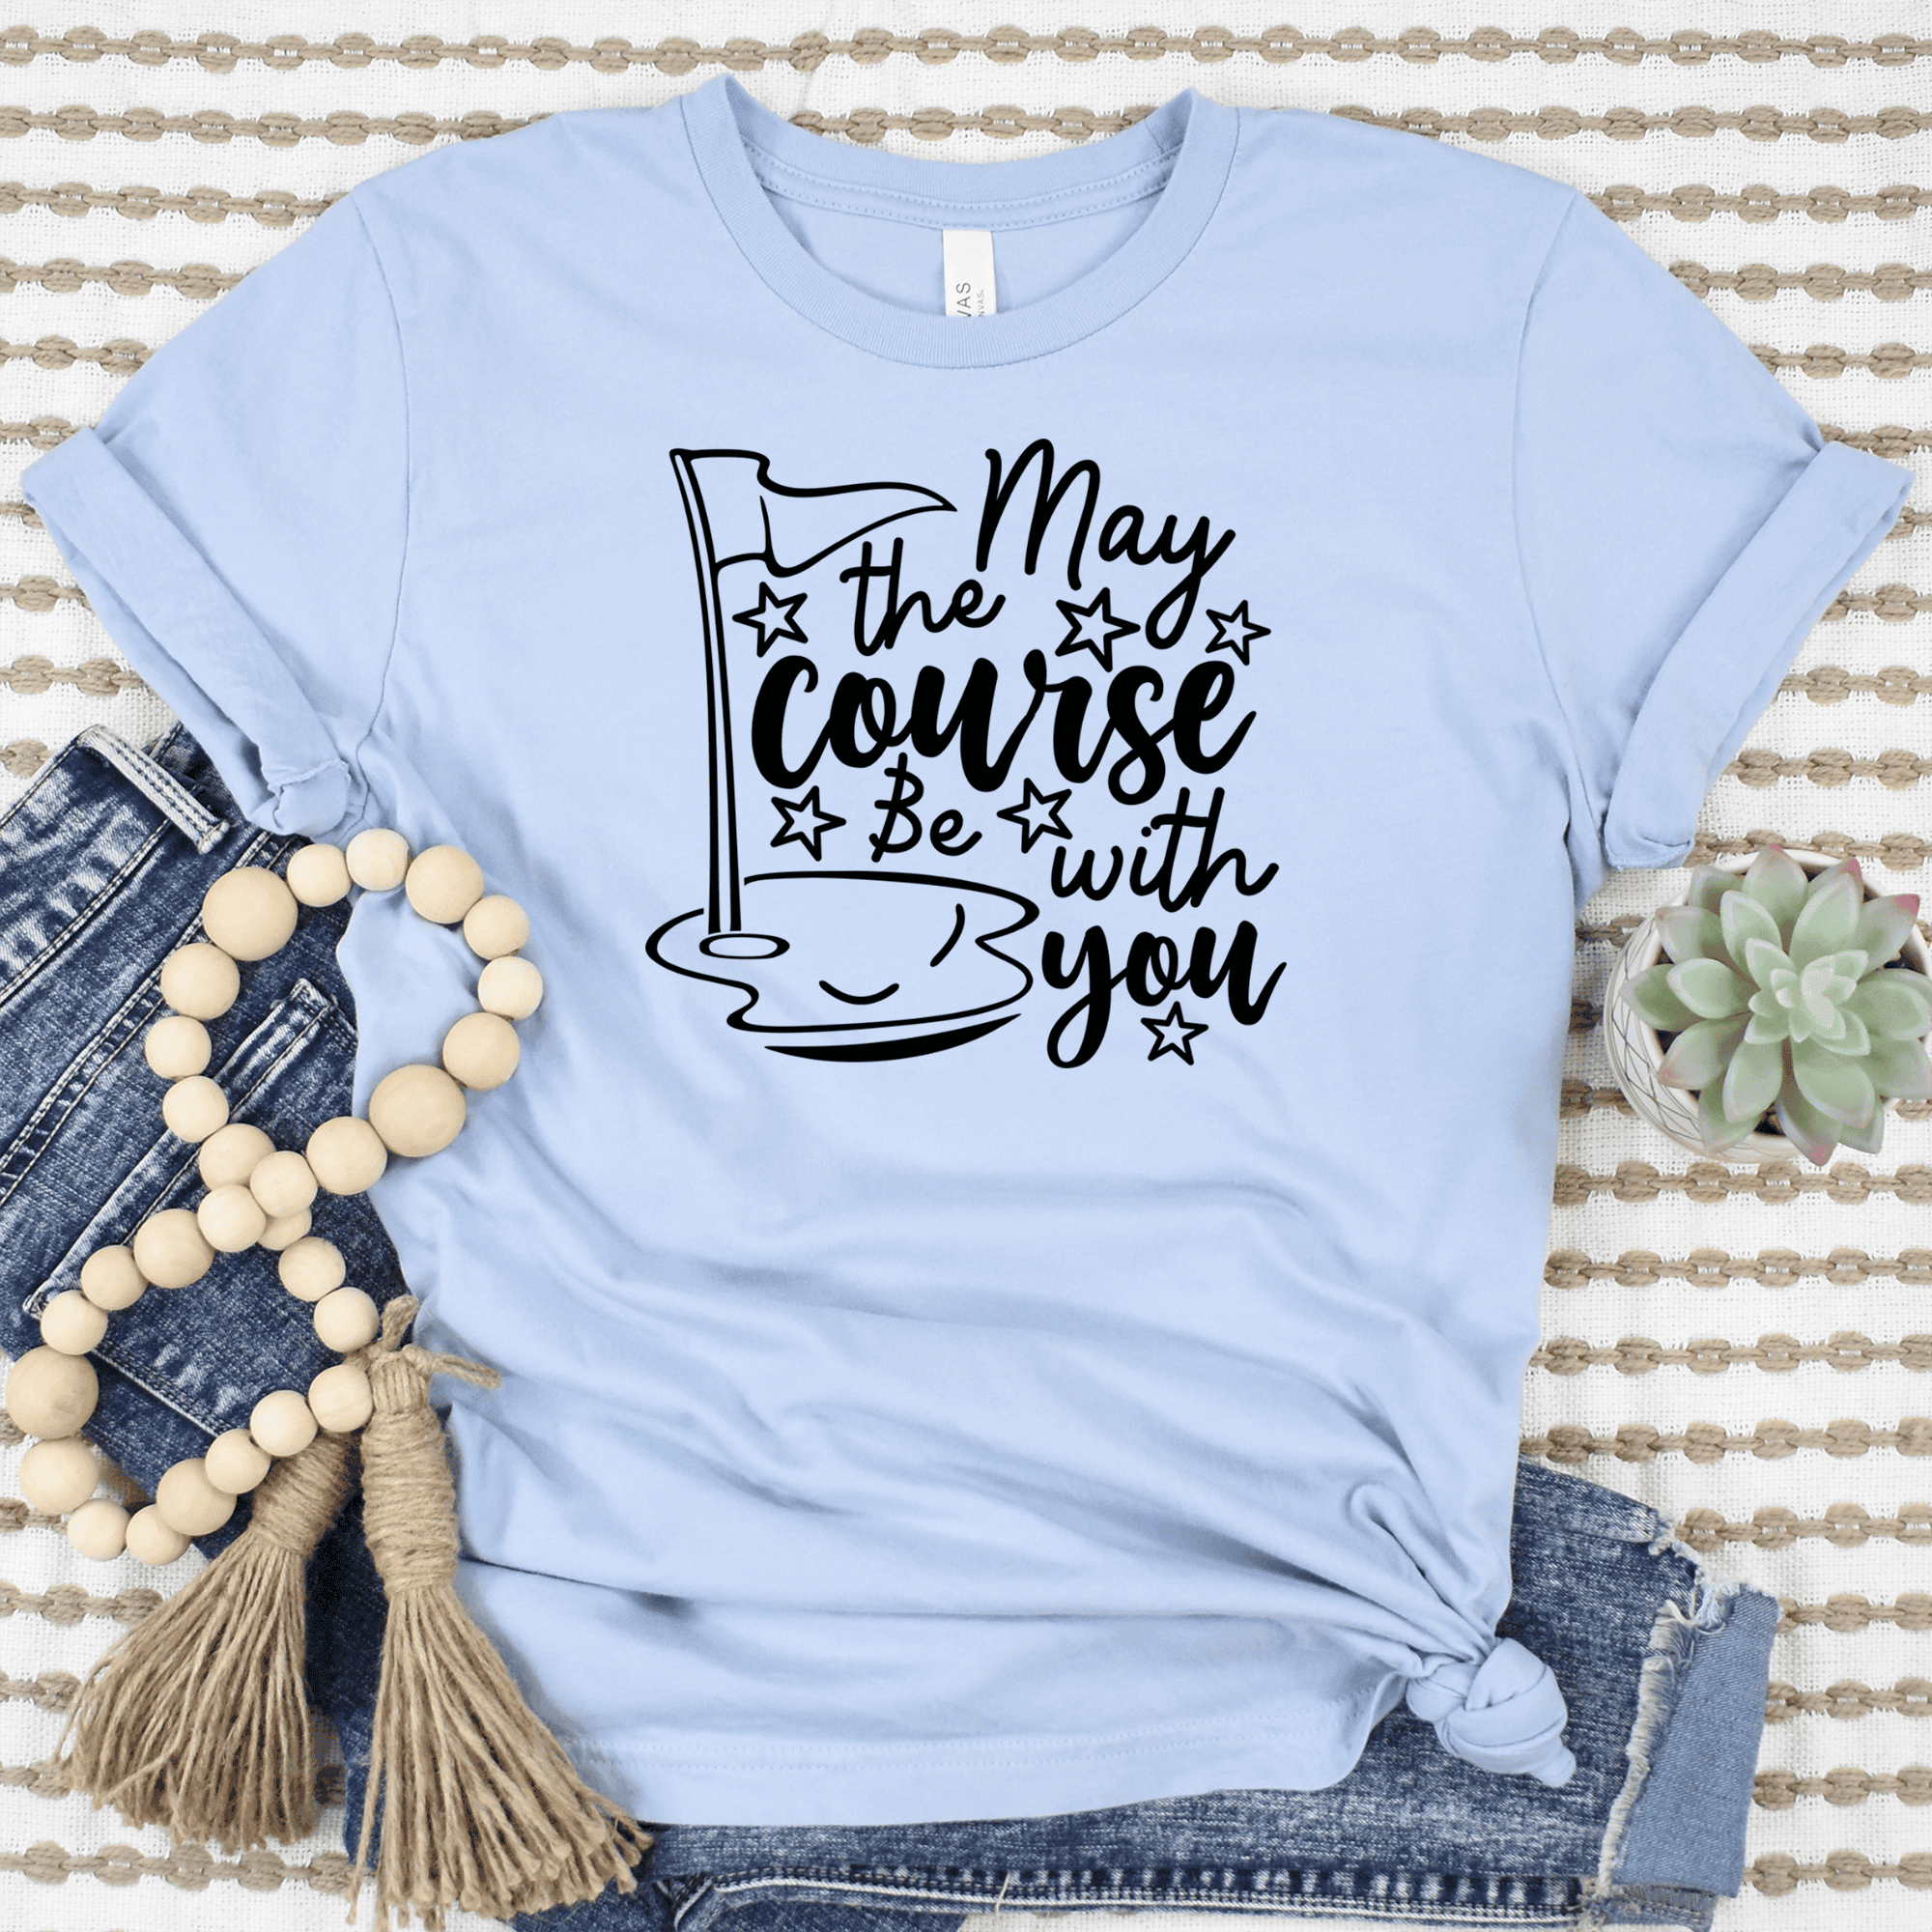 Womens Light Blue T Shirt with May-The-Course-Be-With-You design